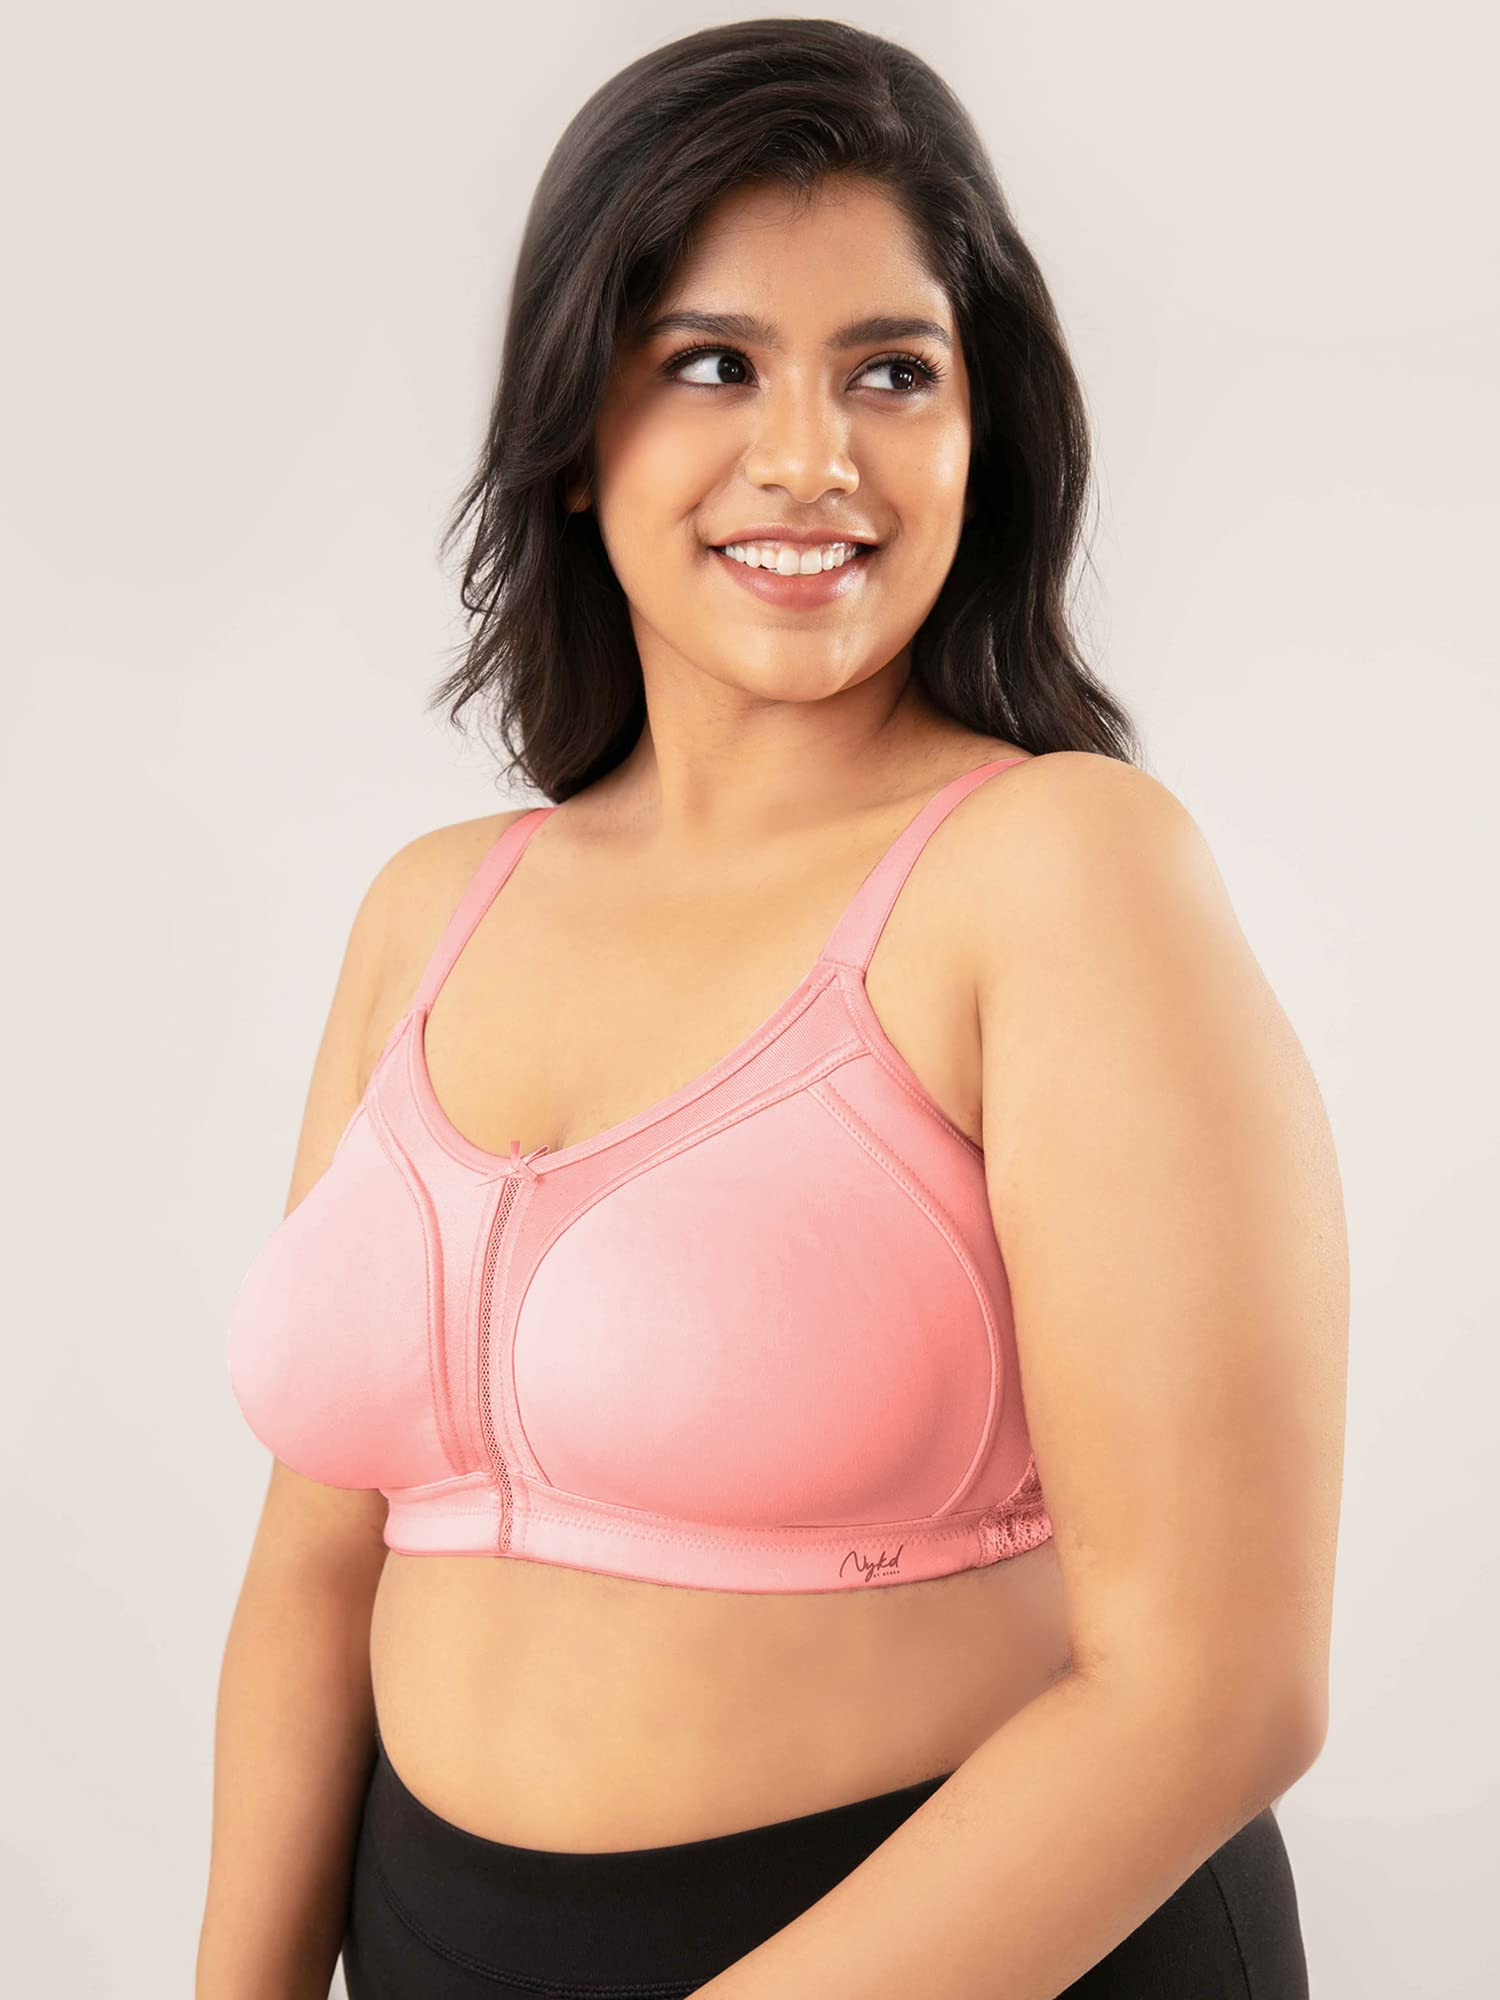 https://www.fastemi.com/uploads/fastemicom/products/nykd-by-nykaa-womens-full-support-m-frame-heavy-bust-everyday-cotton-bra--non-padded--wireless--full-coverage-bra-nyb101-coral-42c-1nsize-42c-239482120152190_l.jpg